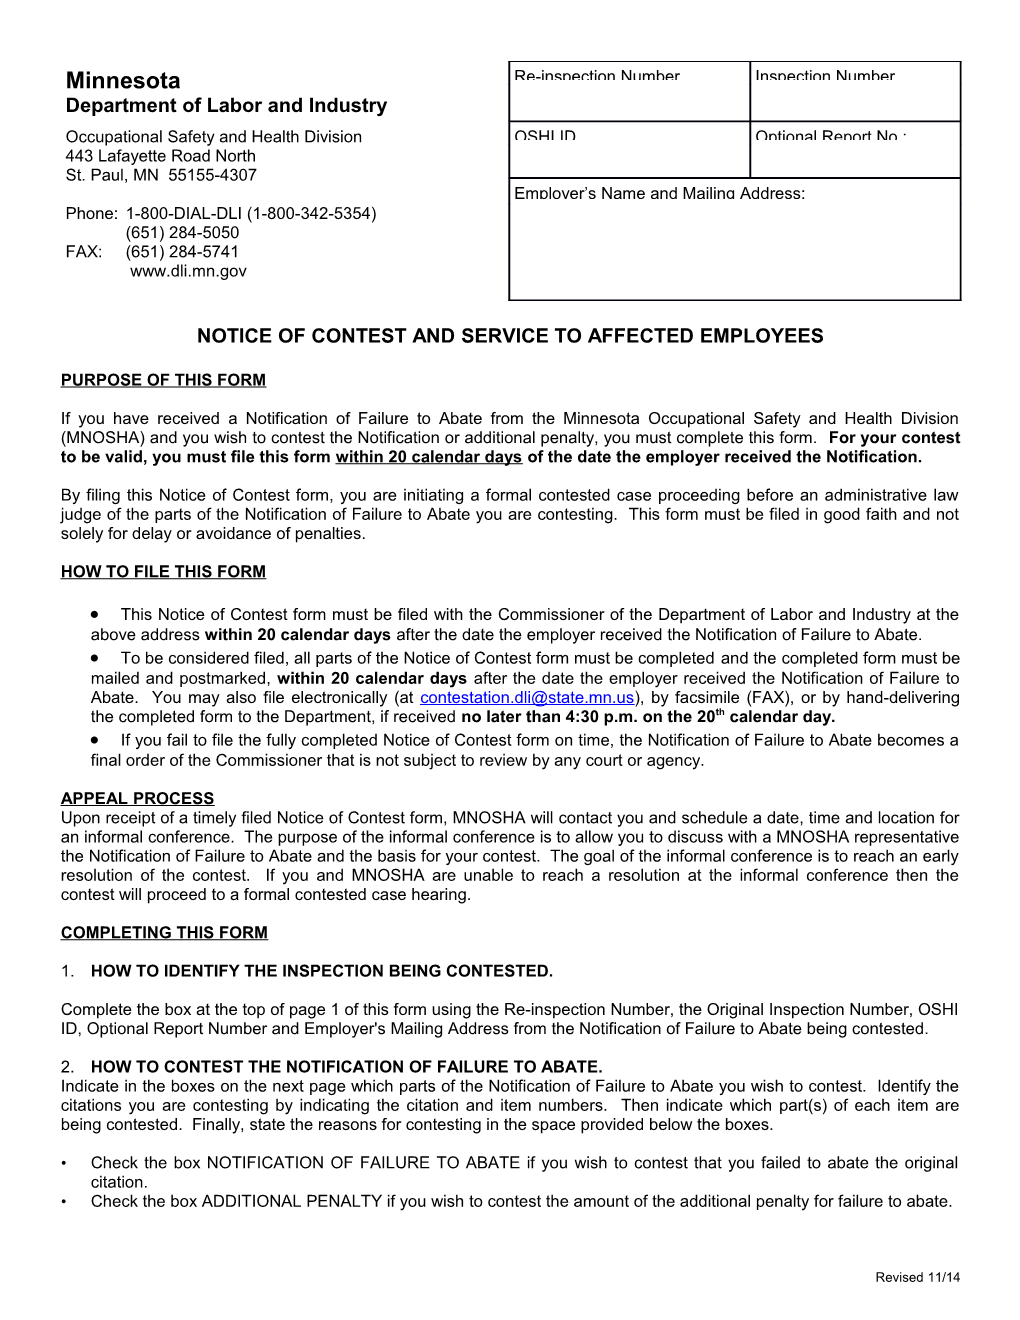 Form, Notice of Contest and Service to Affected Employees